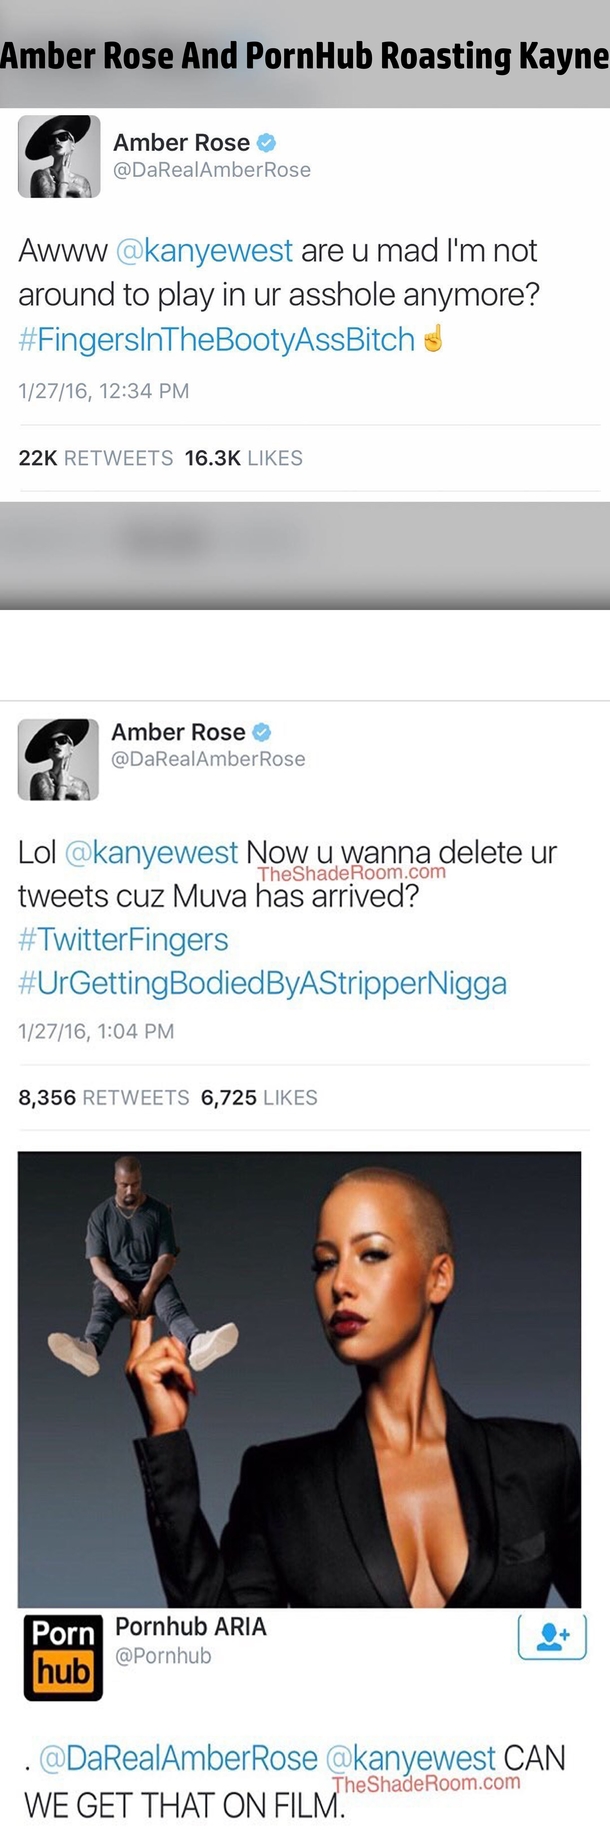 Kayne getting roasted by Amber Rose and PornHub